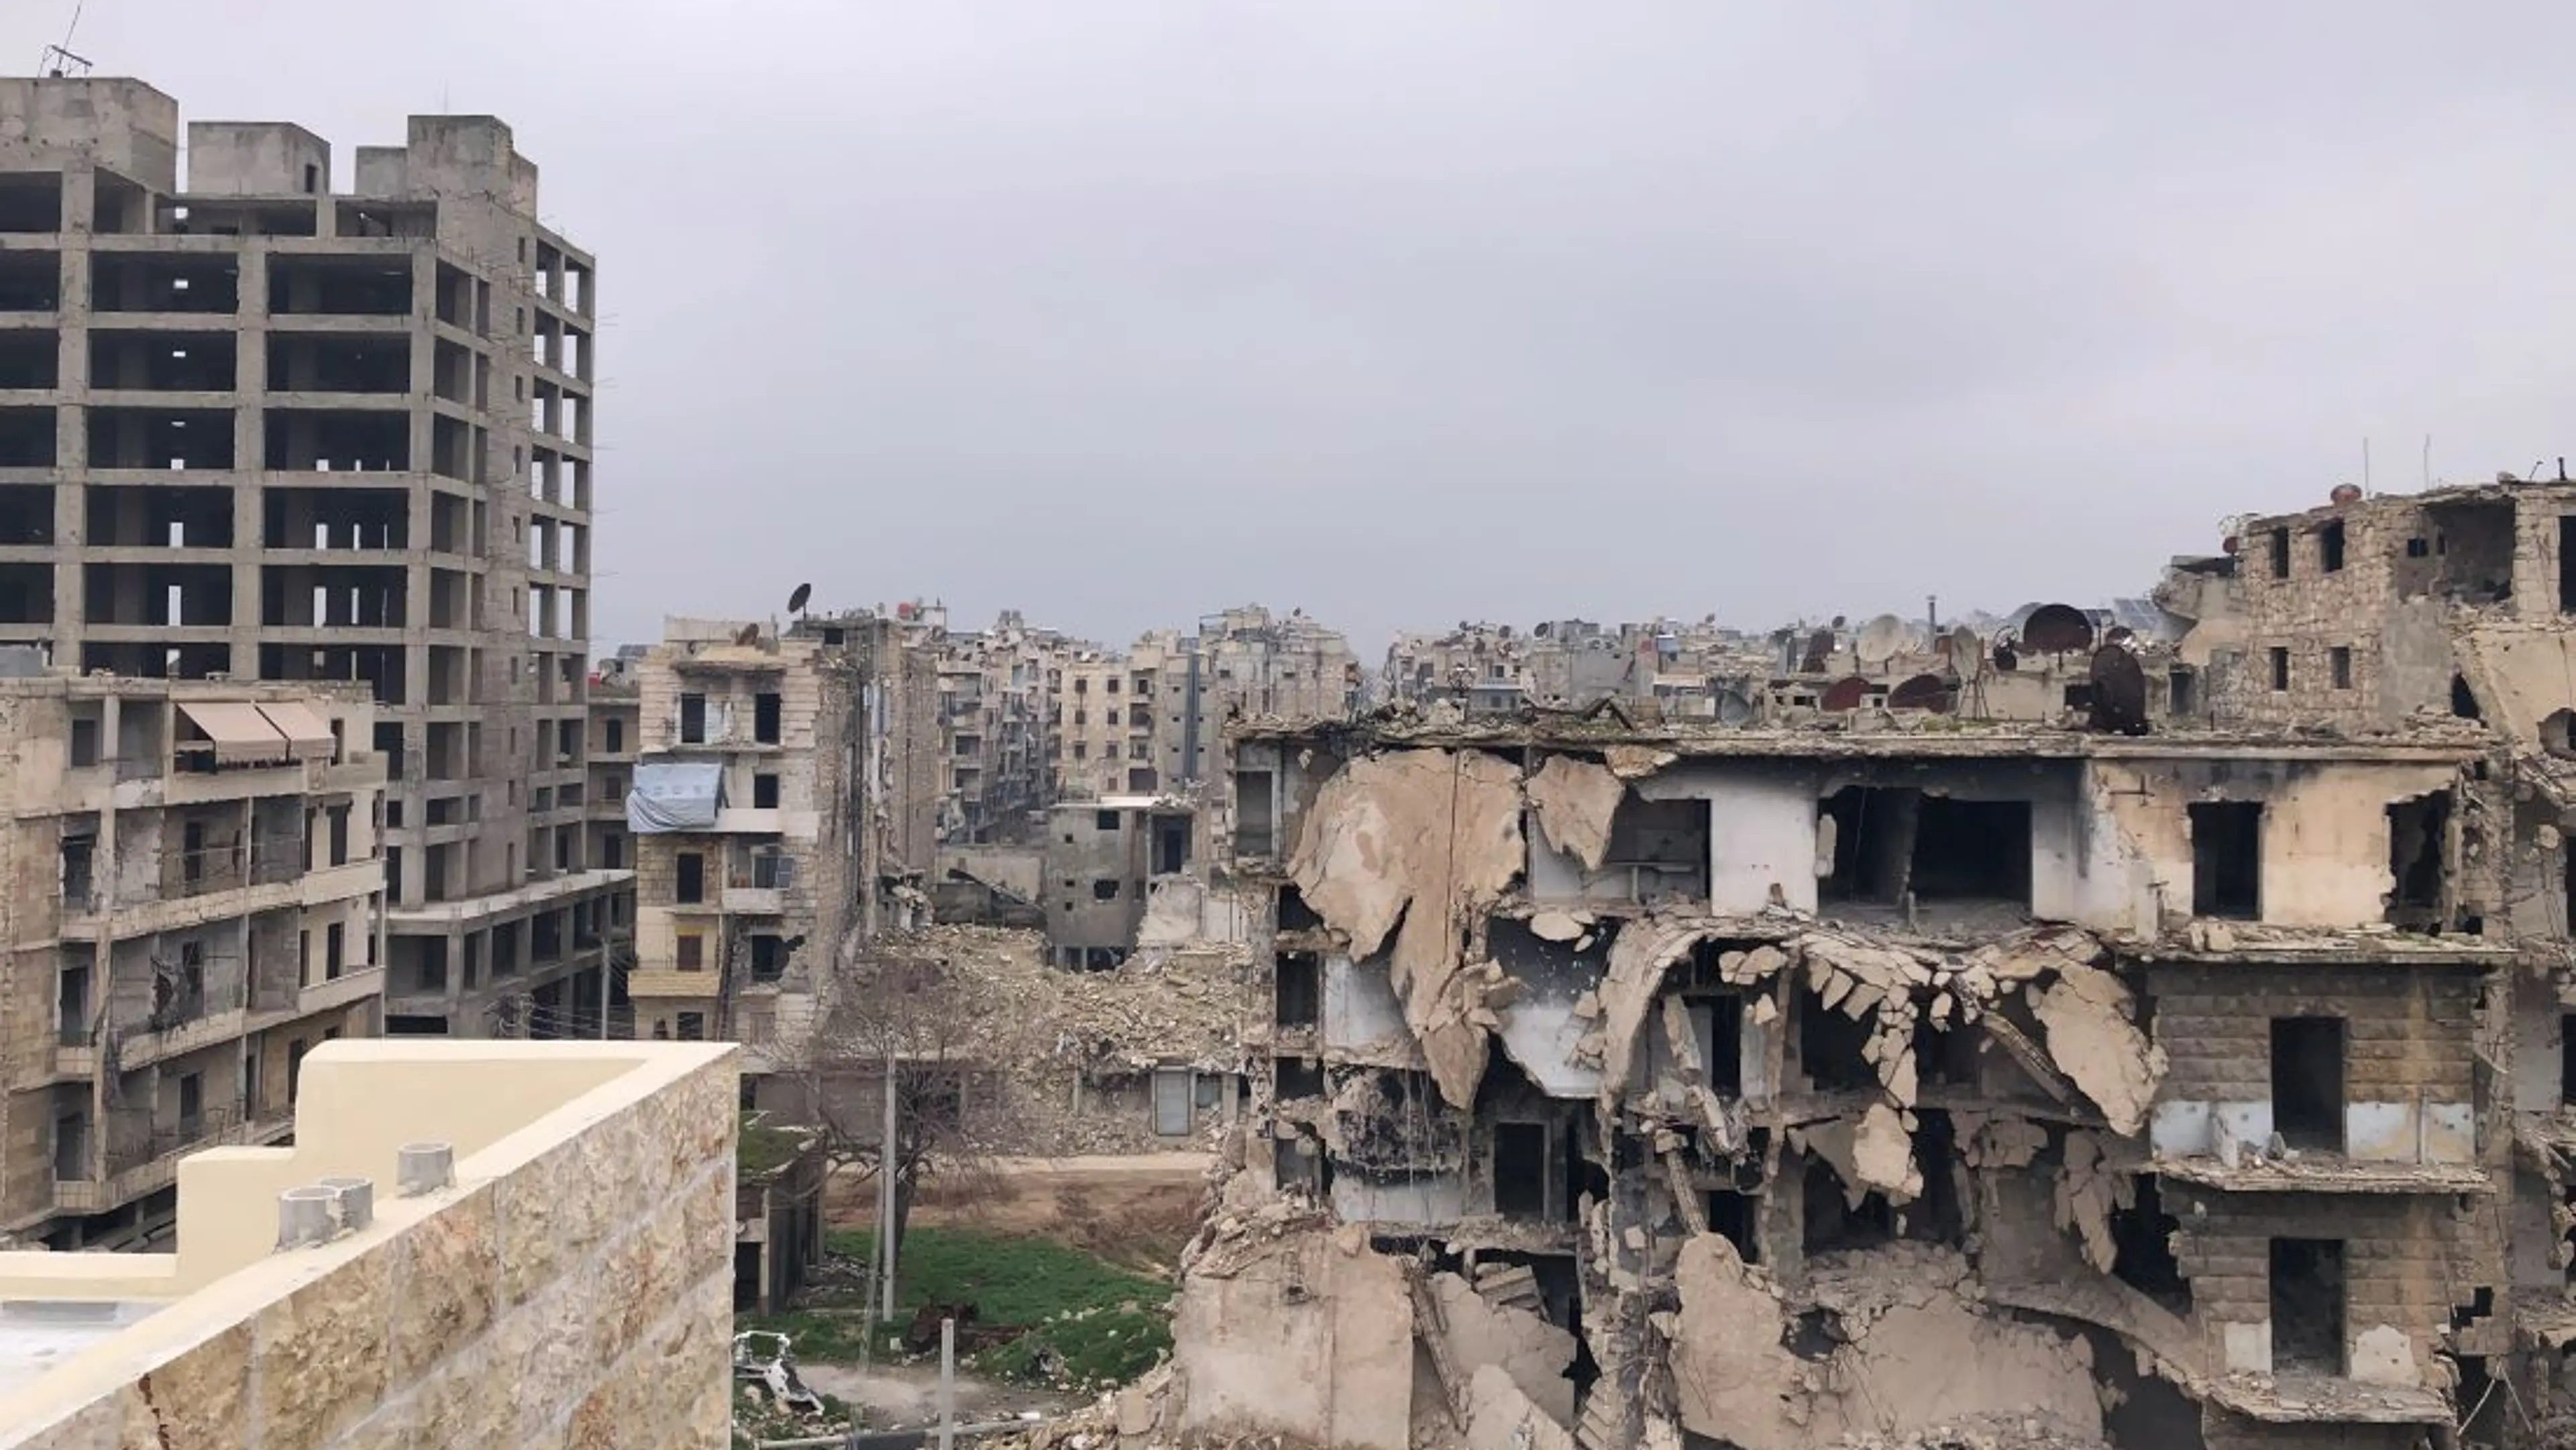 Destruction of homes from conflict in Aleppo, Syria